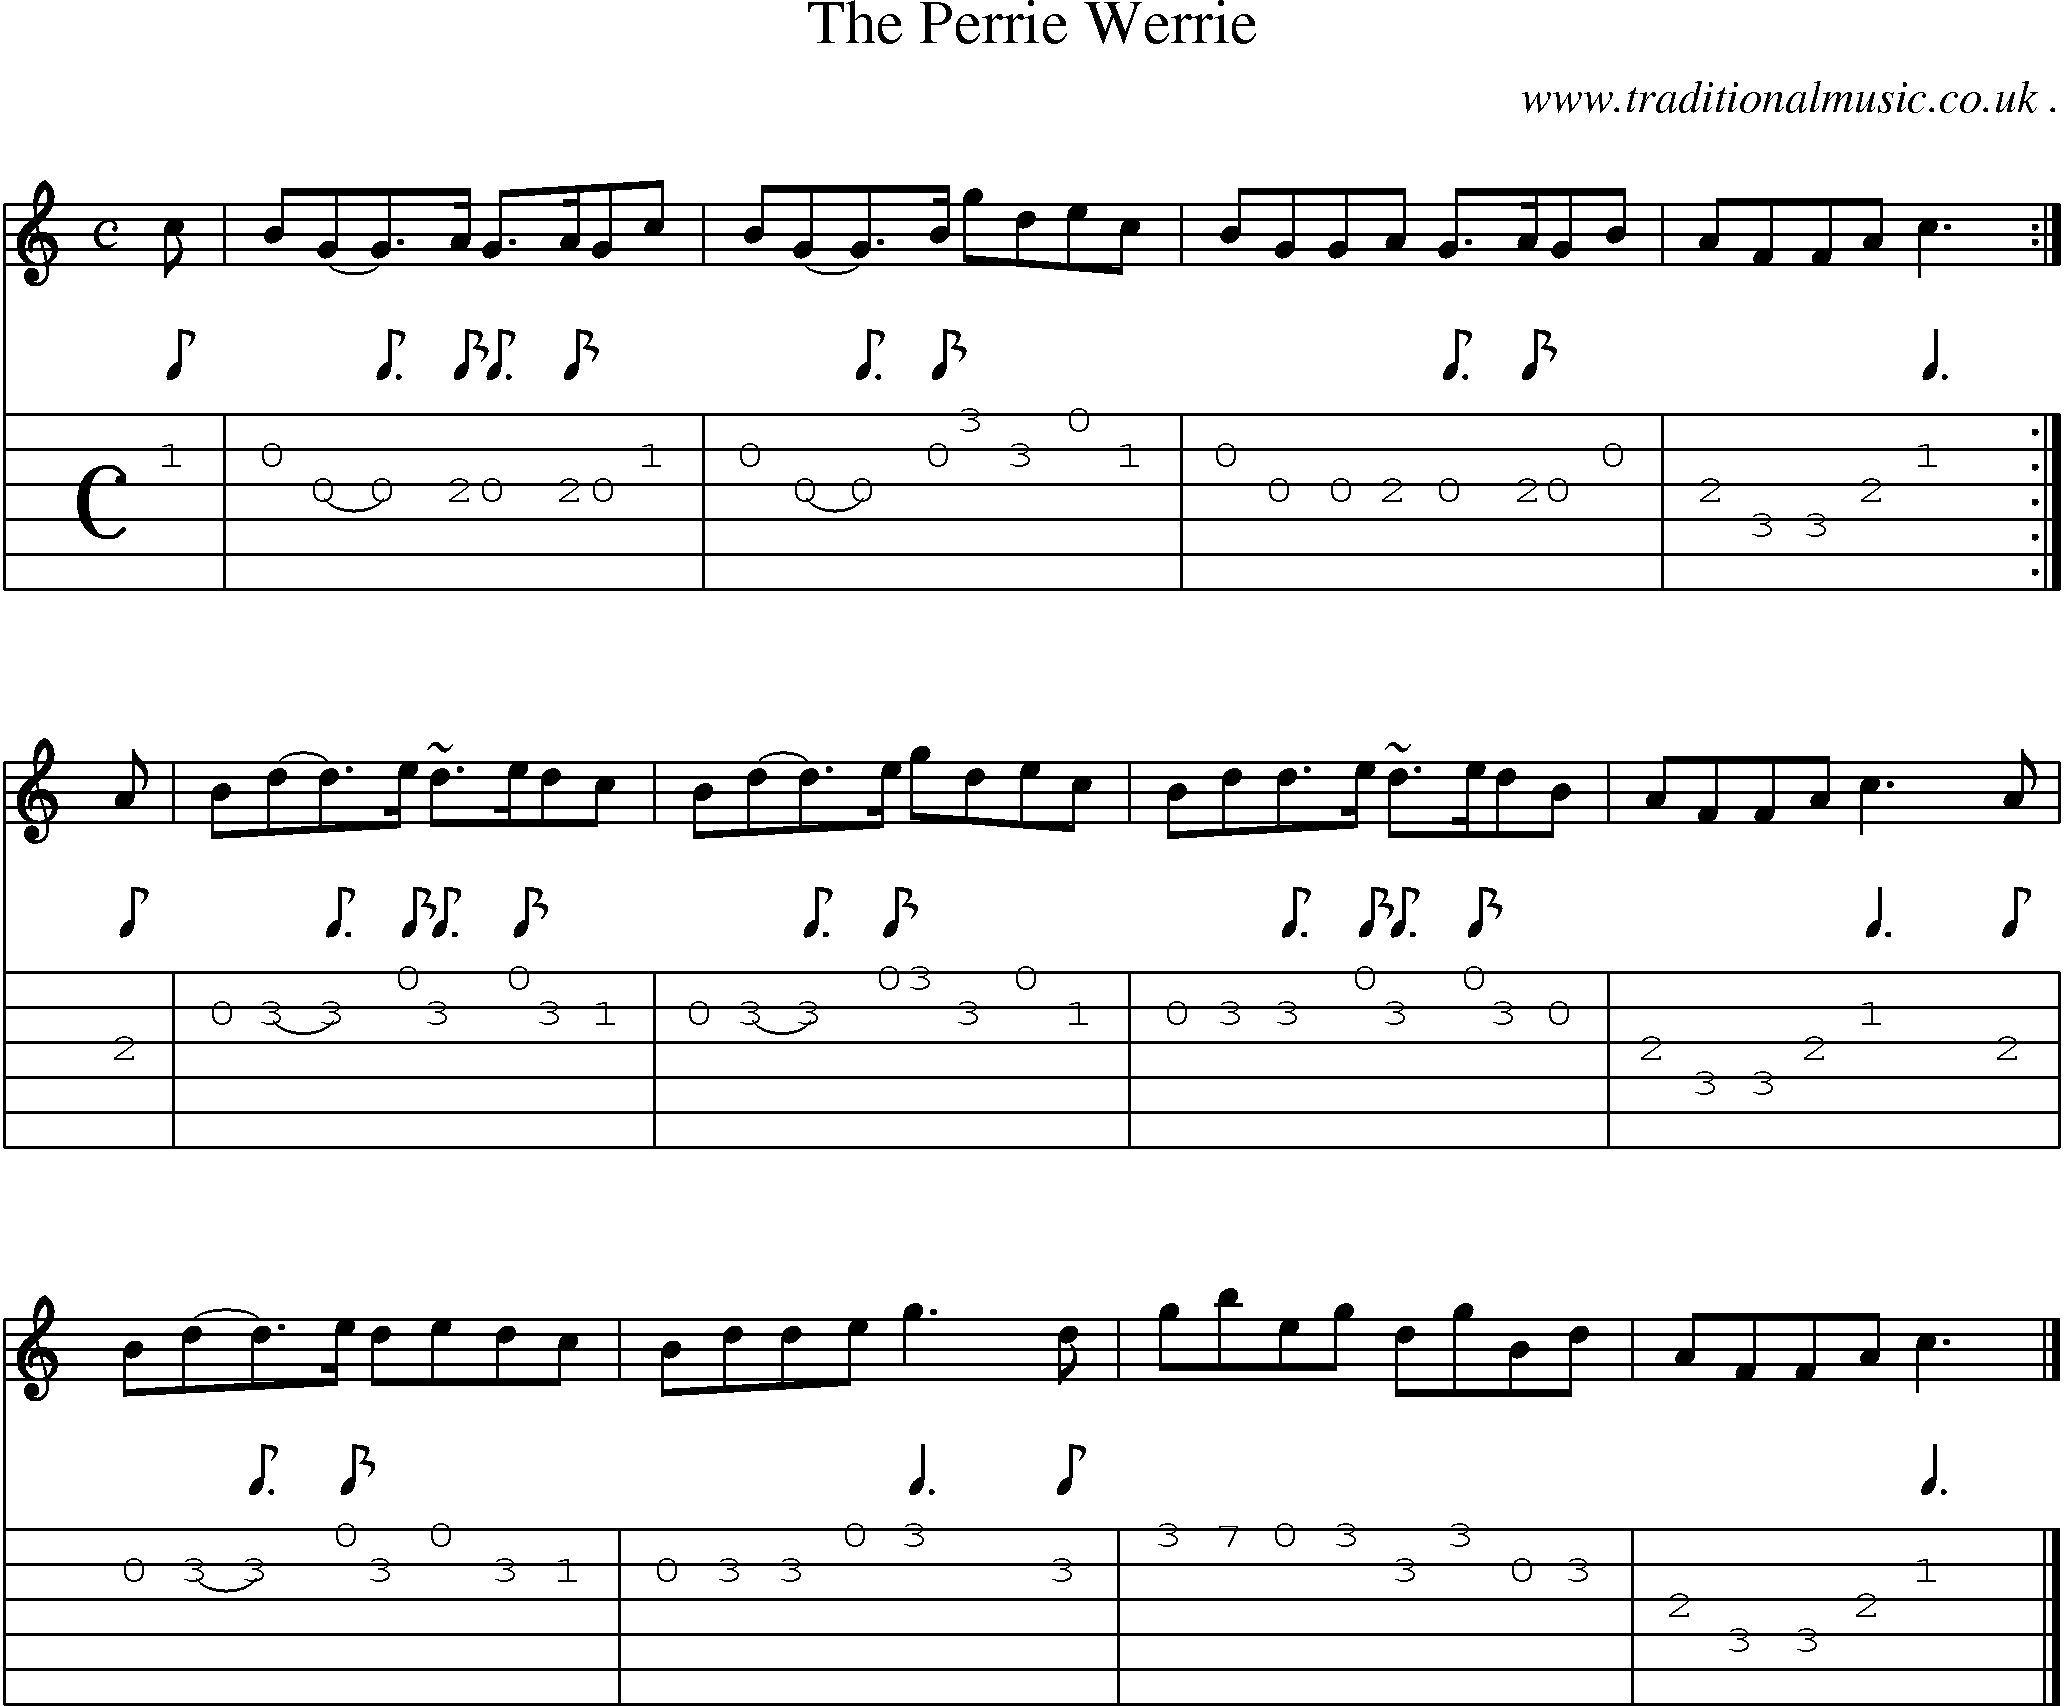 Sheet-music  score, Chords and Guitar Tabs for The Perrie Werrie